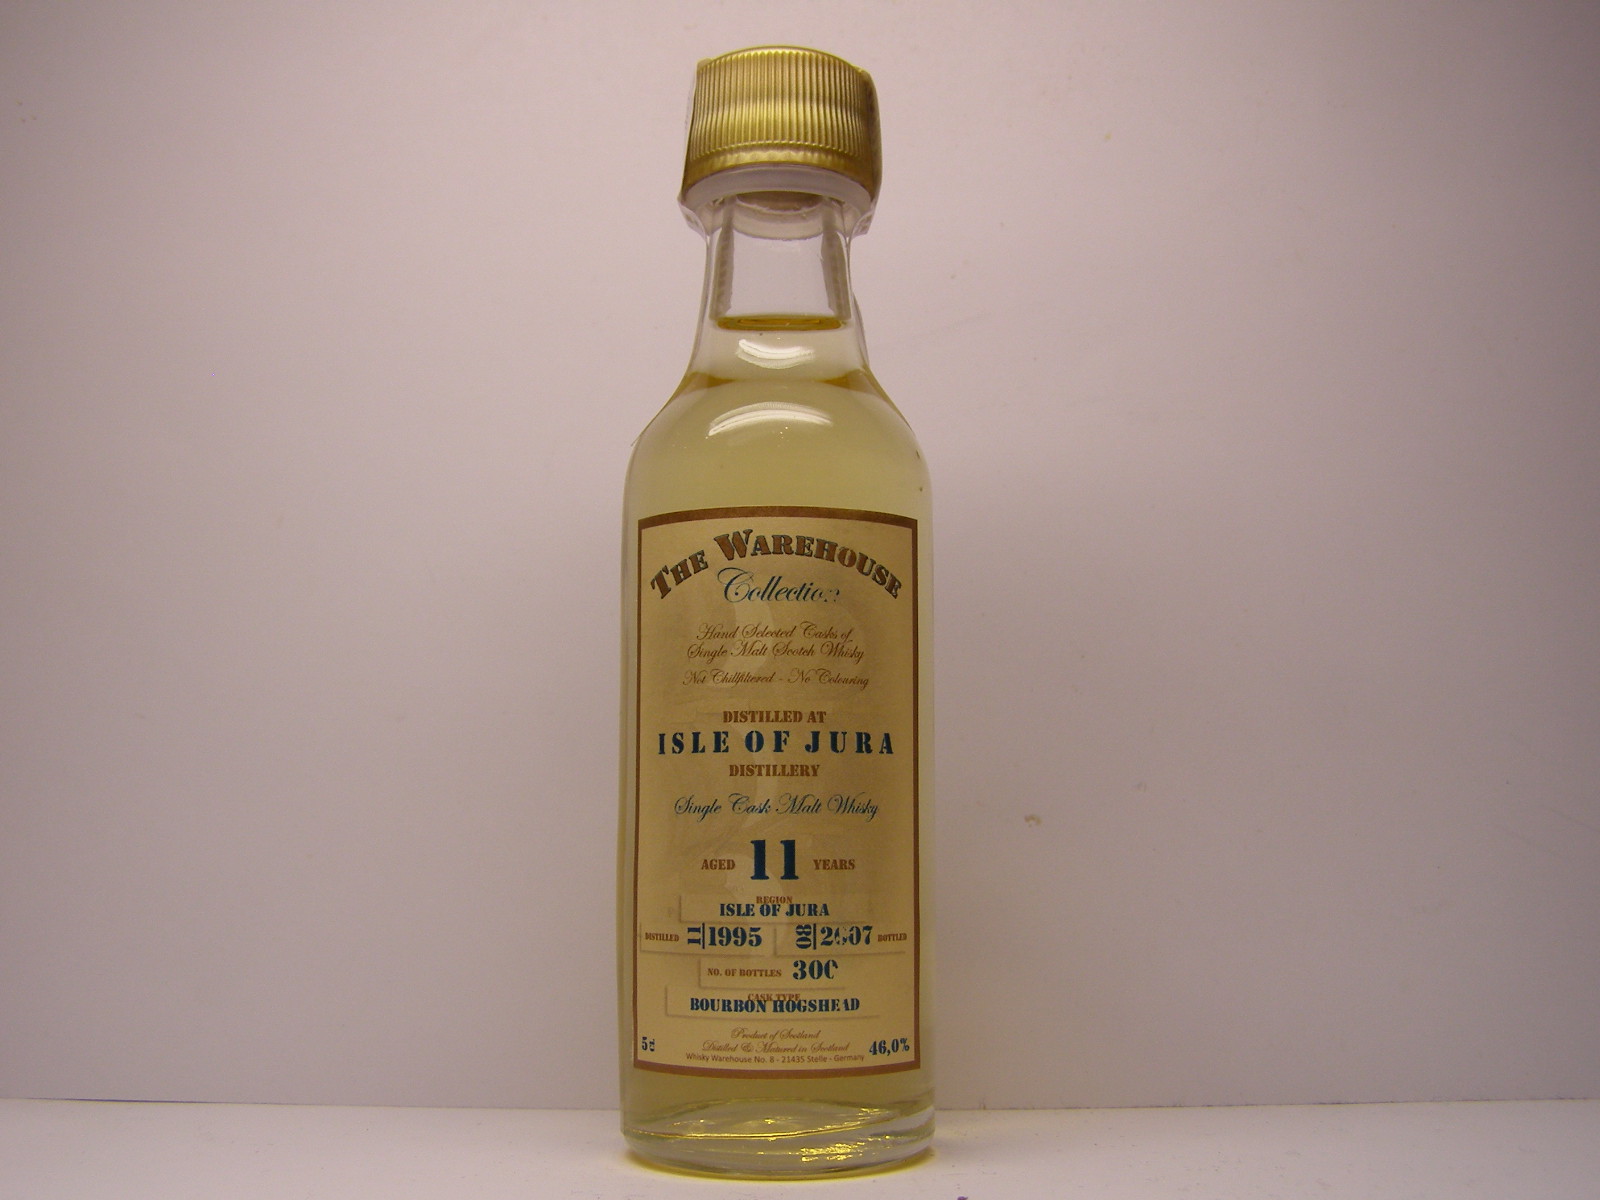 SCMW 11yo 1995-2007 "The Warehouse Collection" 5cl 46%